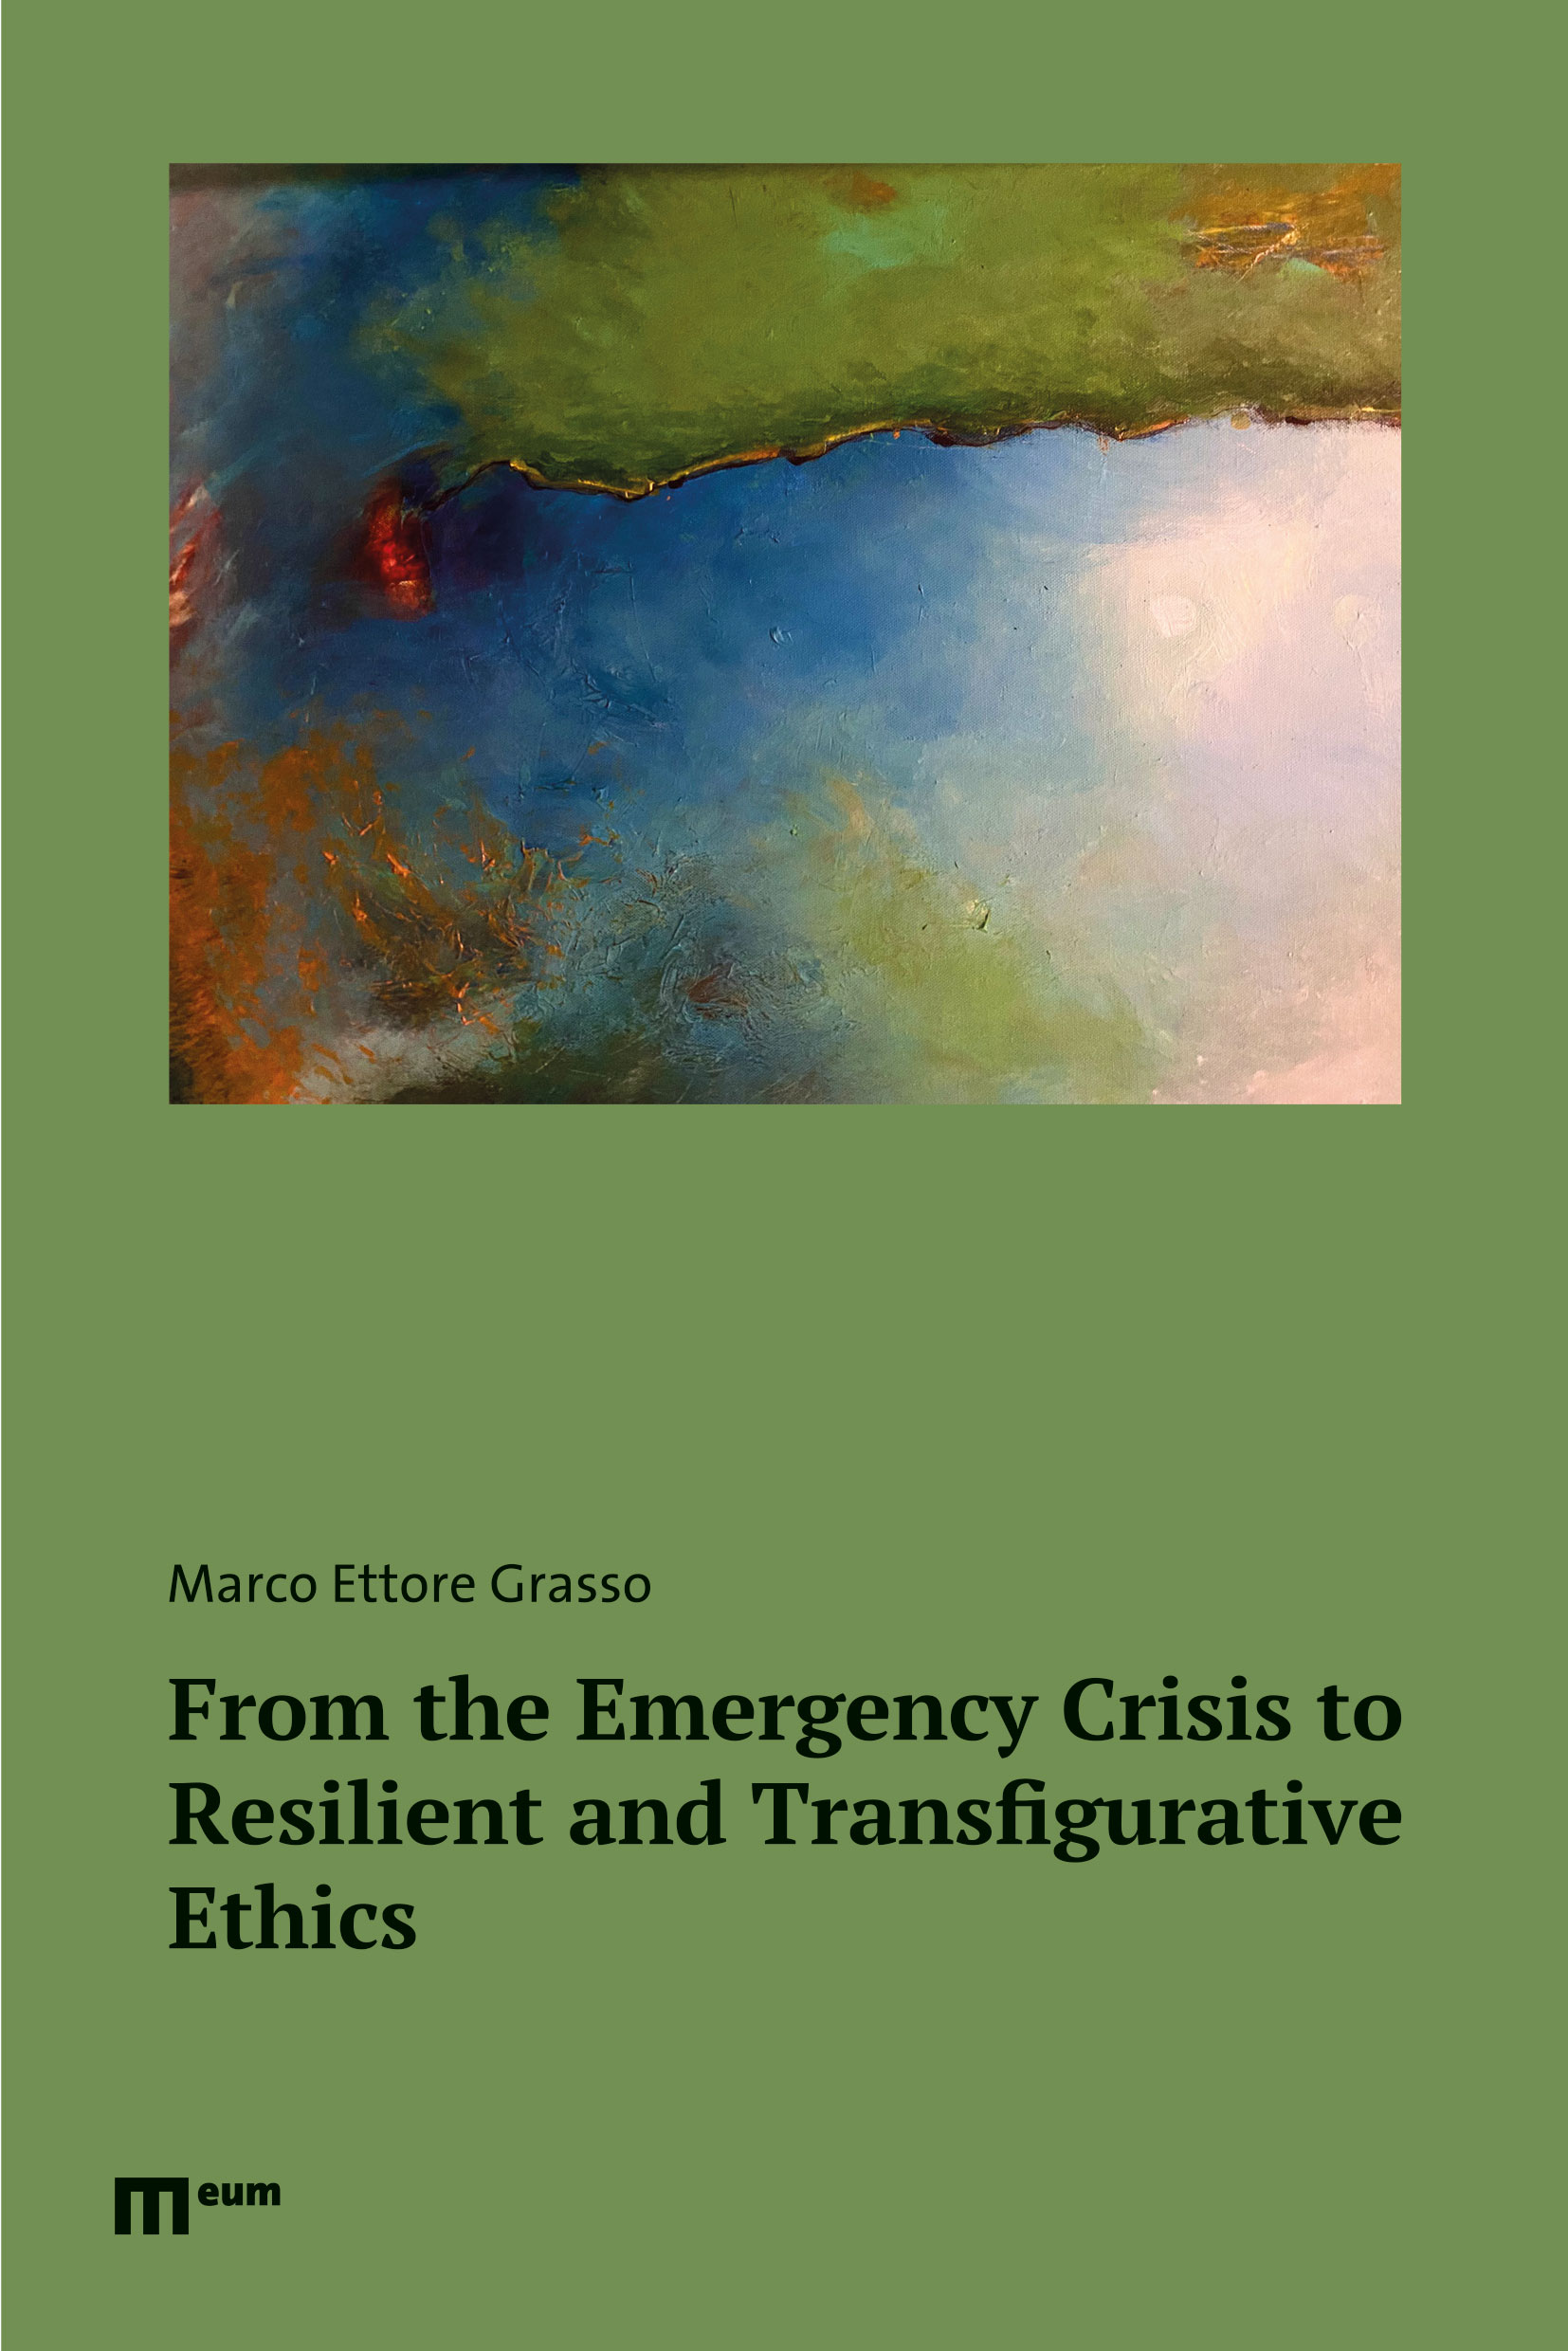 From the Emergency Crisis to Resilient and Transfigurative Ethics